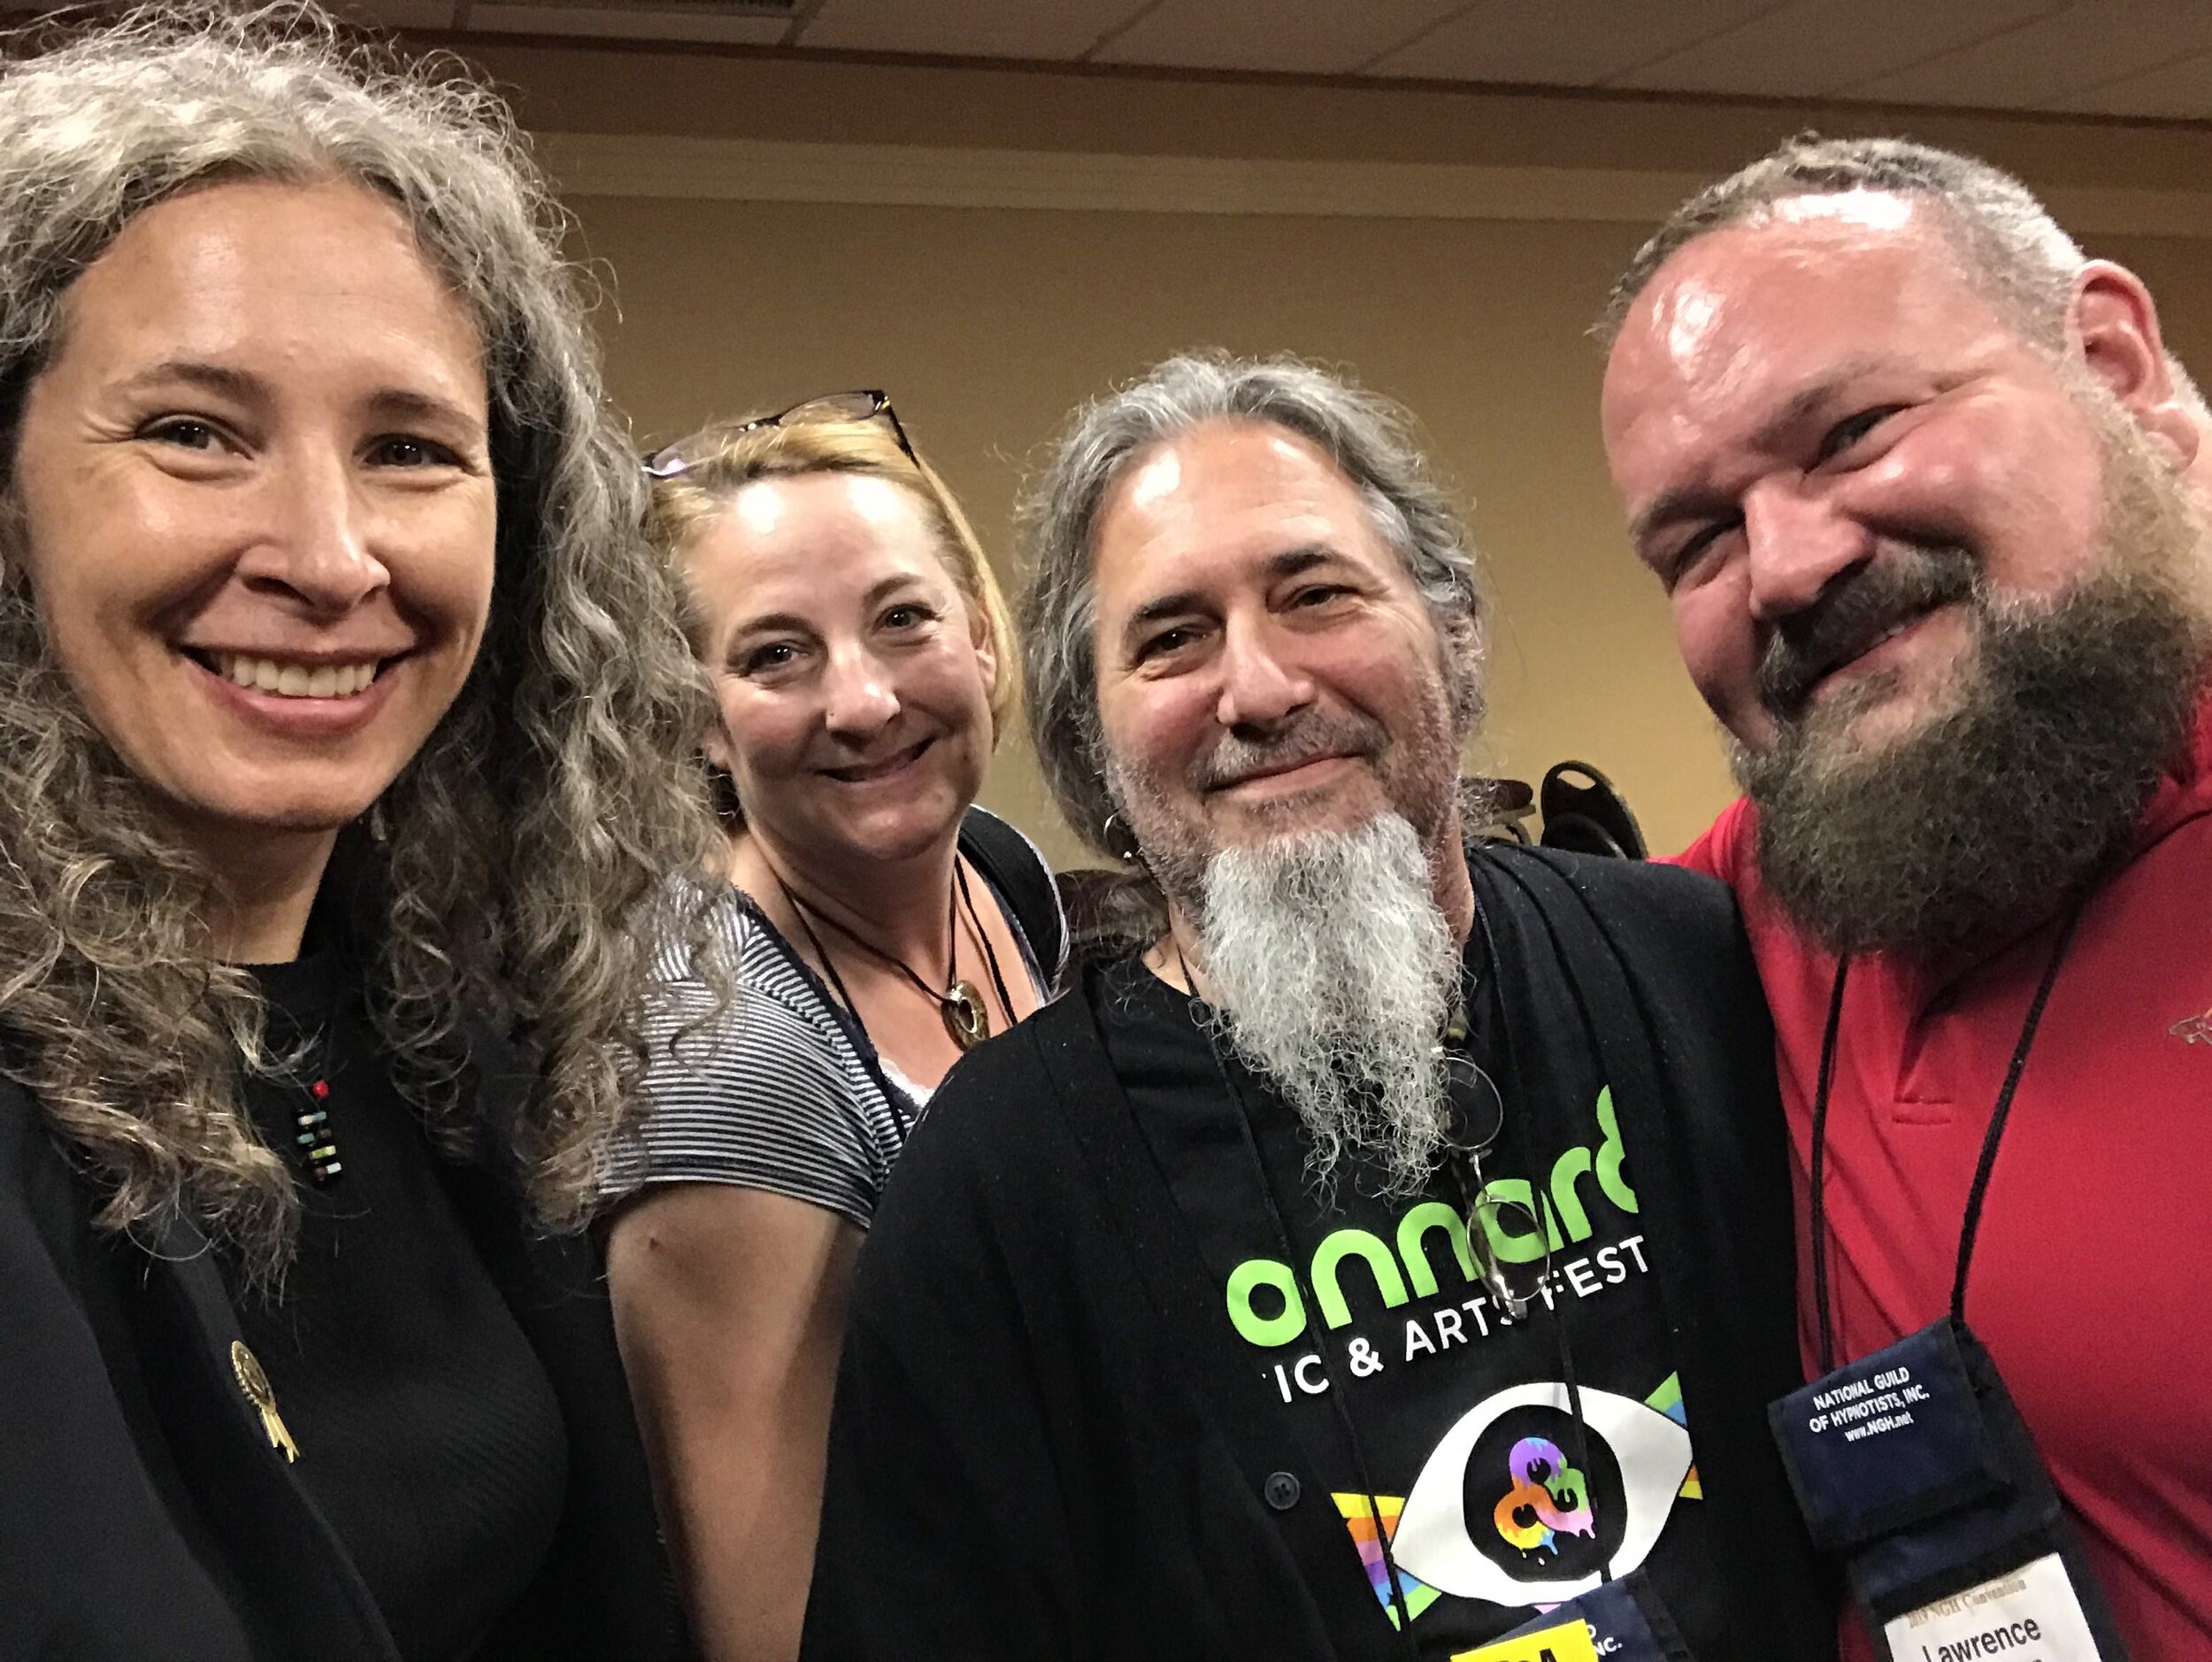 Erika Flint with grads at the NGH convention: Paulette Deckers, Dillion Sims, and Lawrence Winnerman. Not pictured: Kathie Hardy, and Tracy Kim